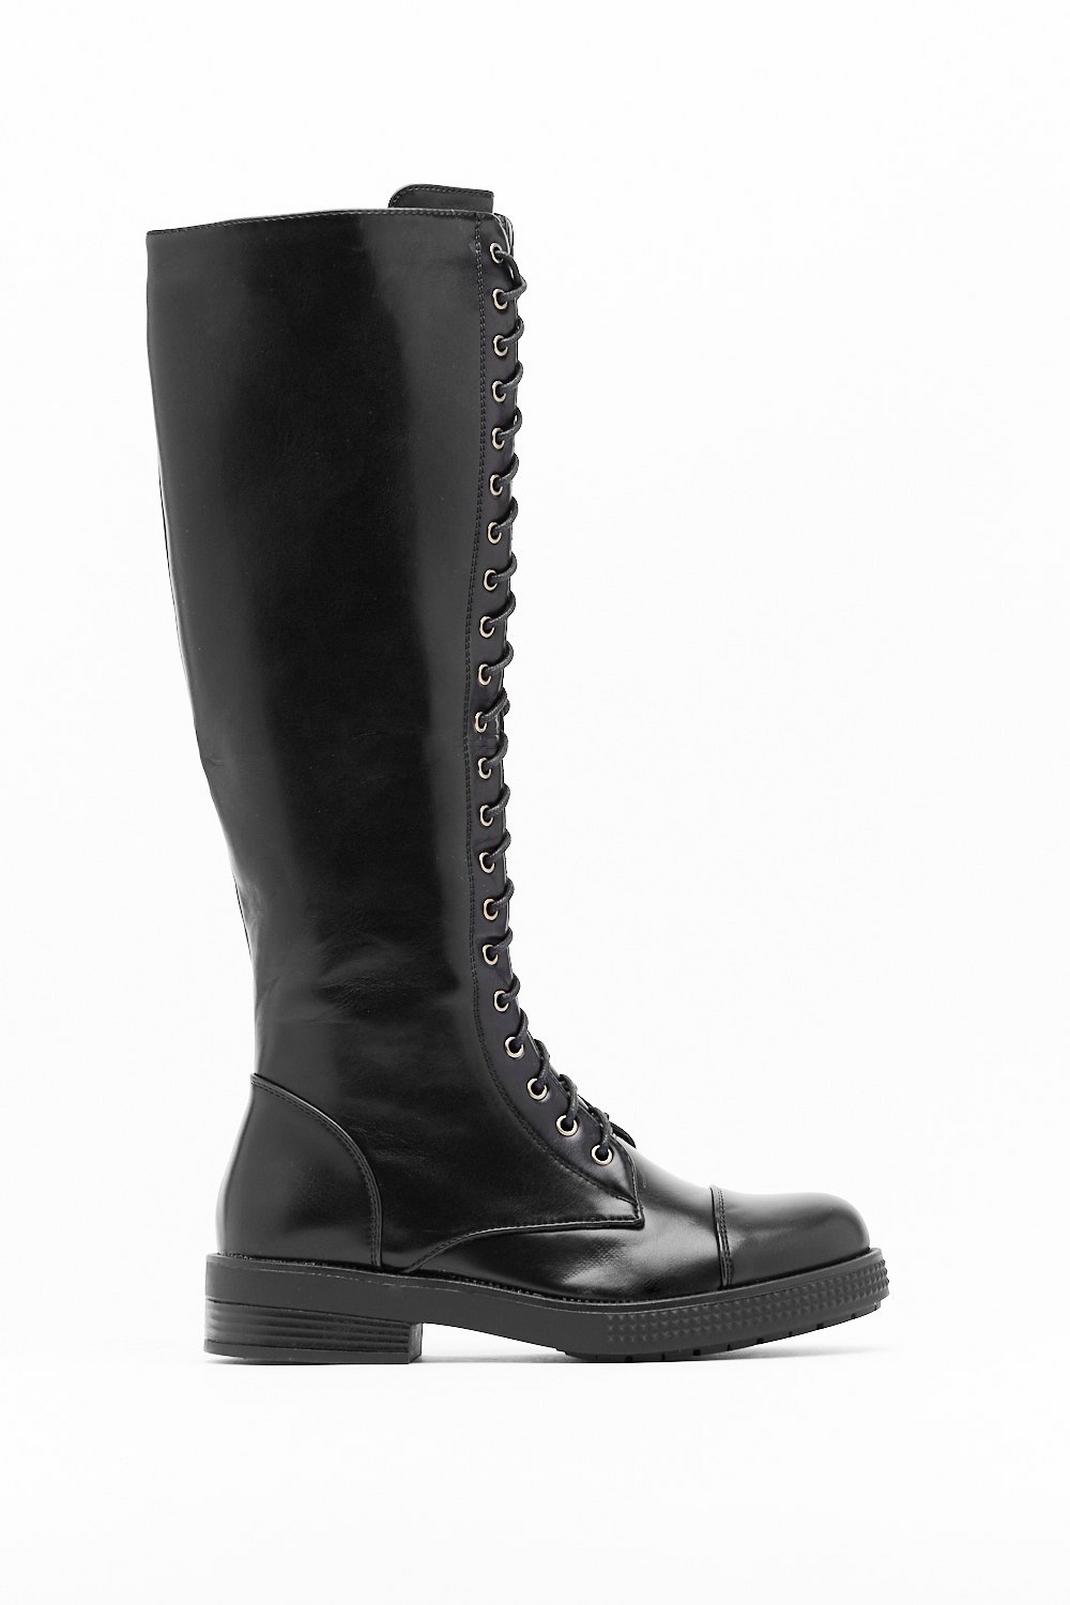 Hold Lace-Up Faux Leather Knee-High Boots | Nasty Gal